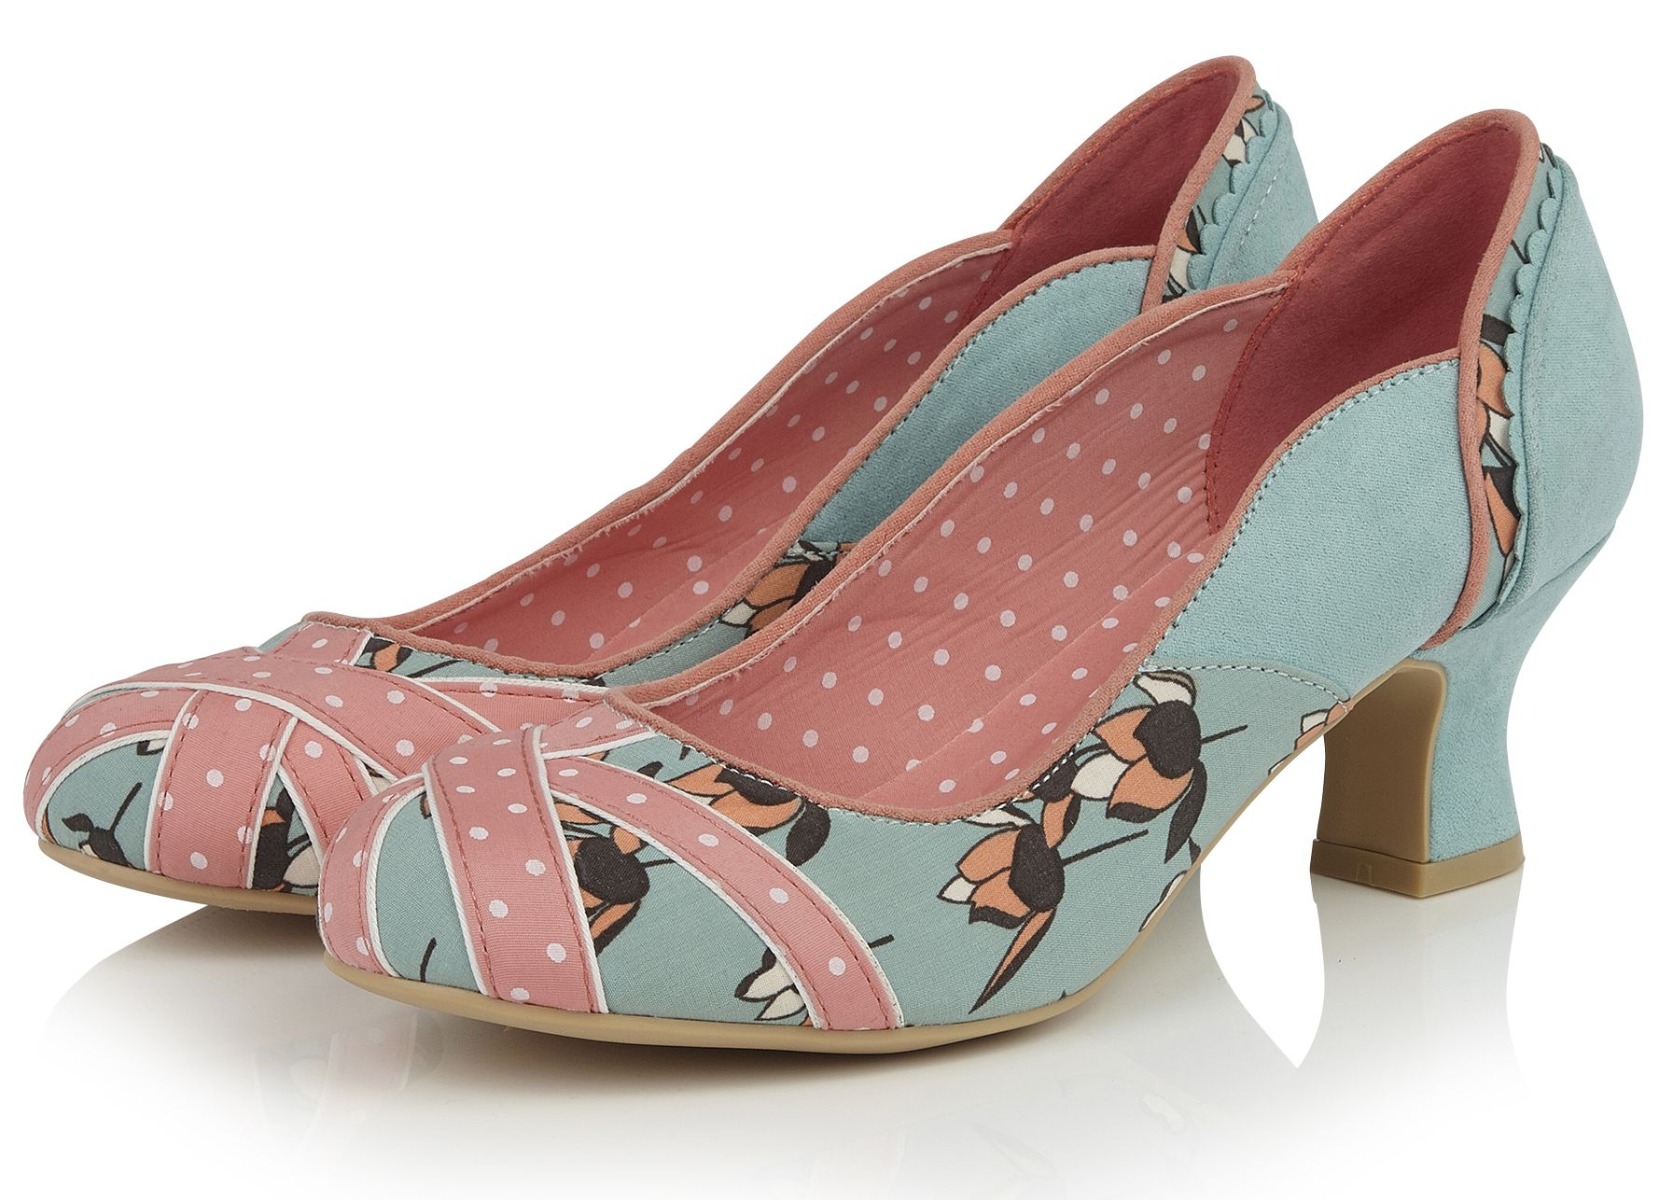 rs09278m_chaussures-escarpins-pin-up-retro-50-s-glam-chic-paula-menthe